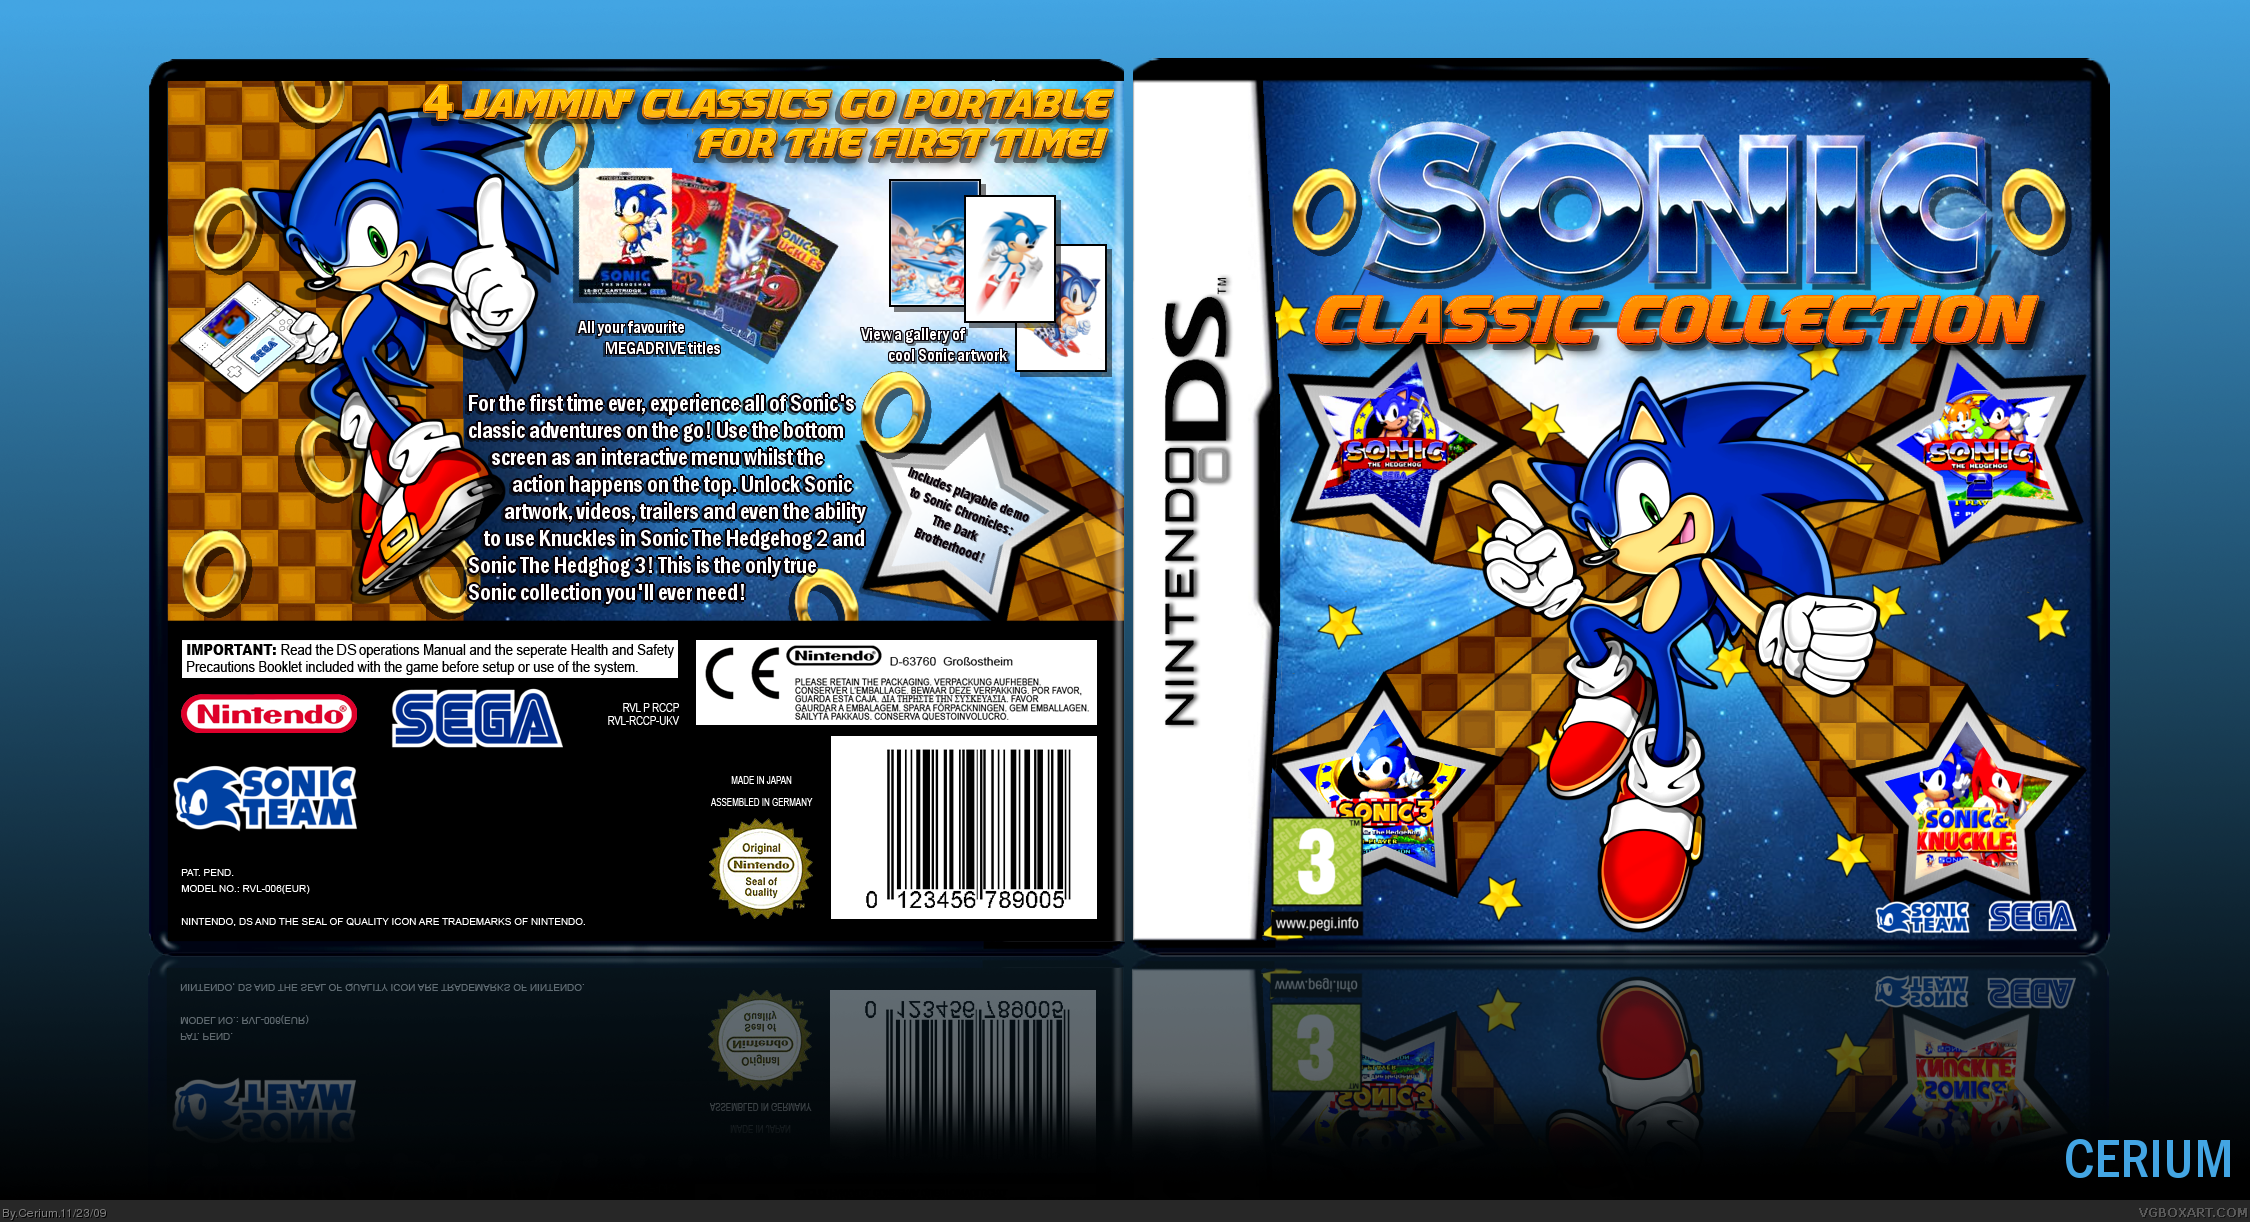 Sonic Classic Collection box cover